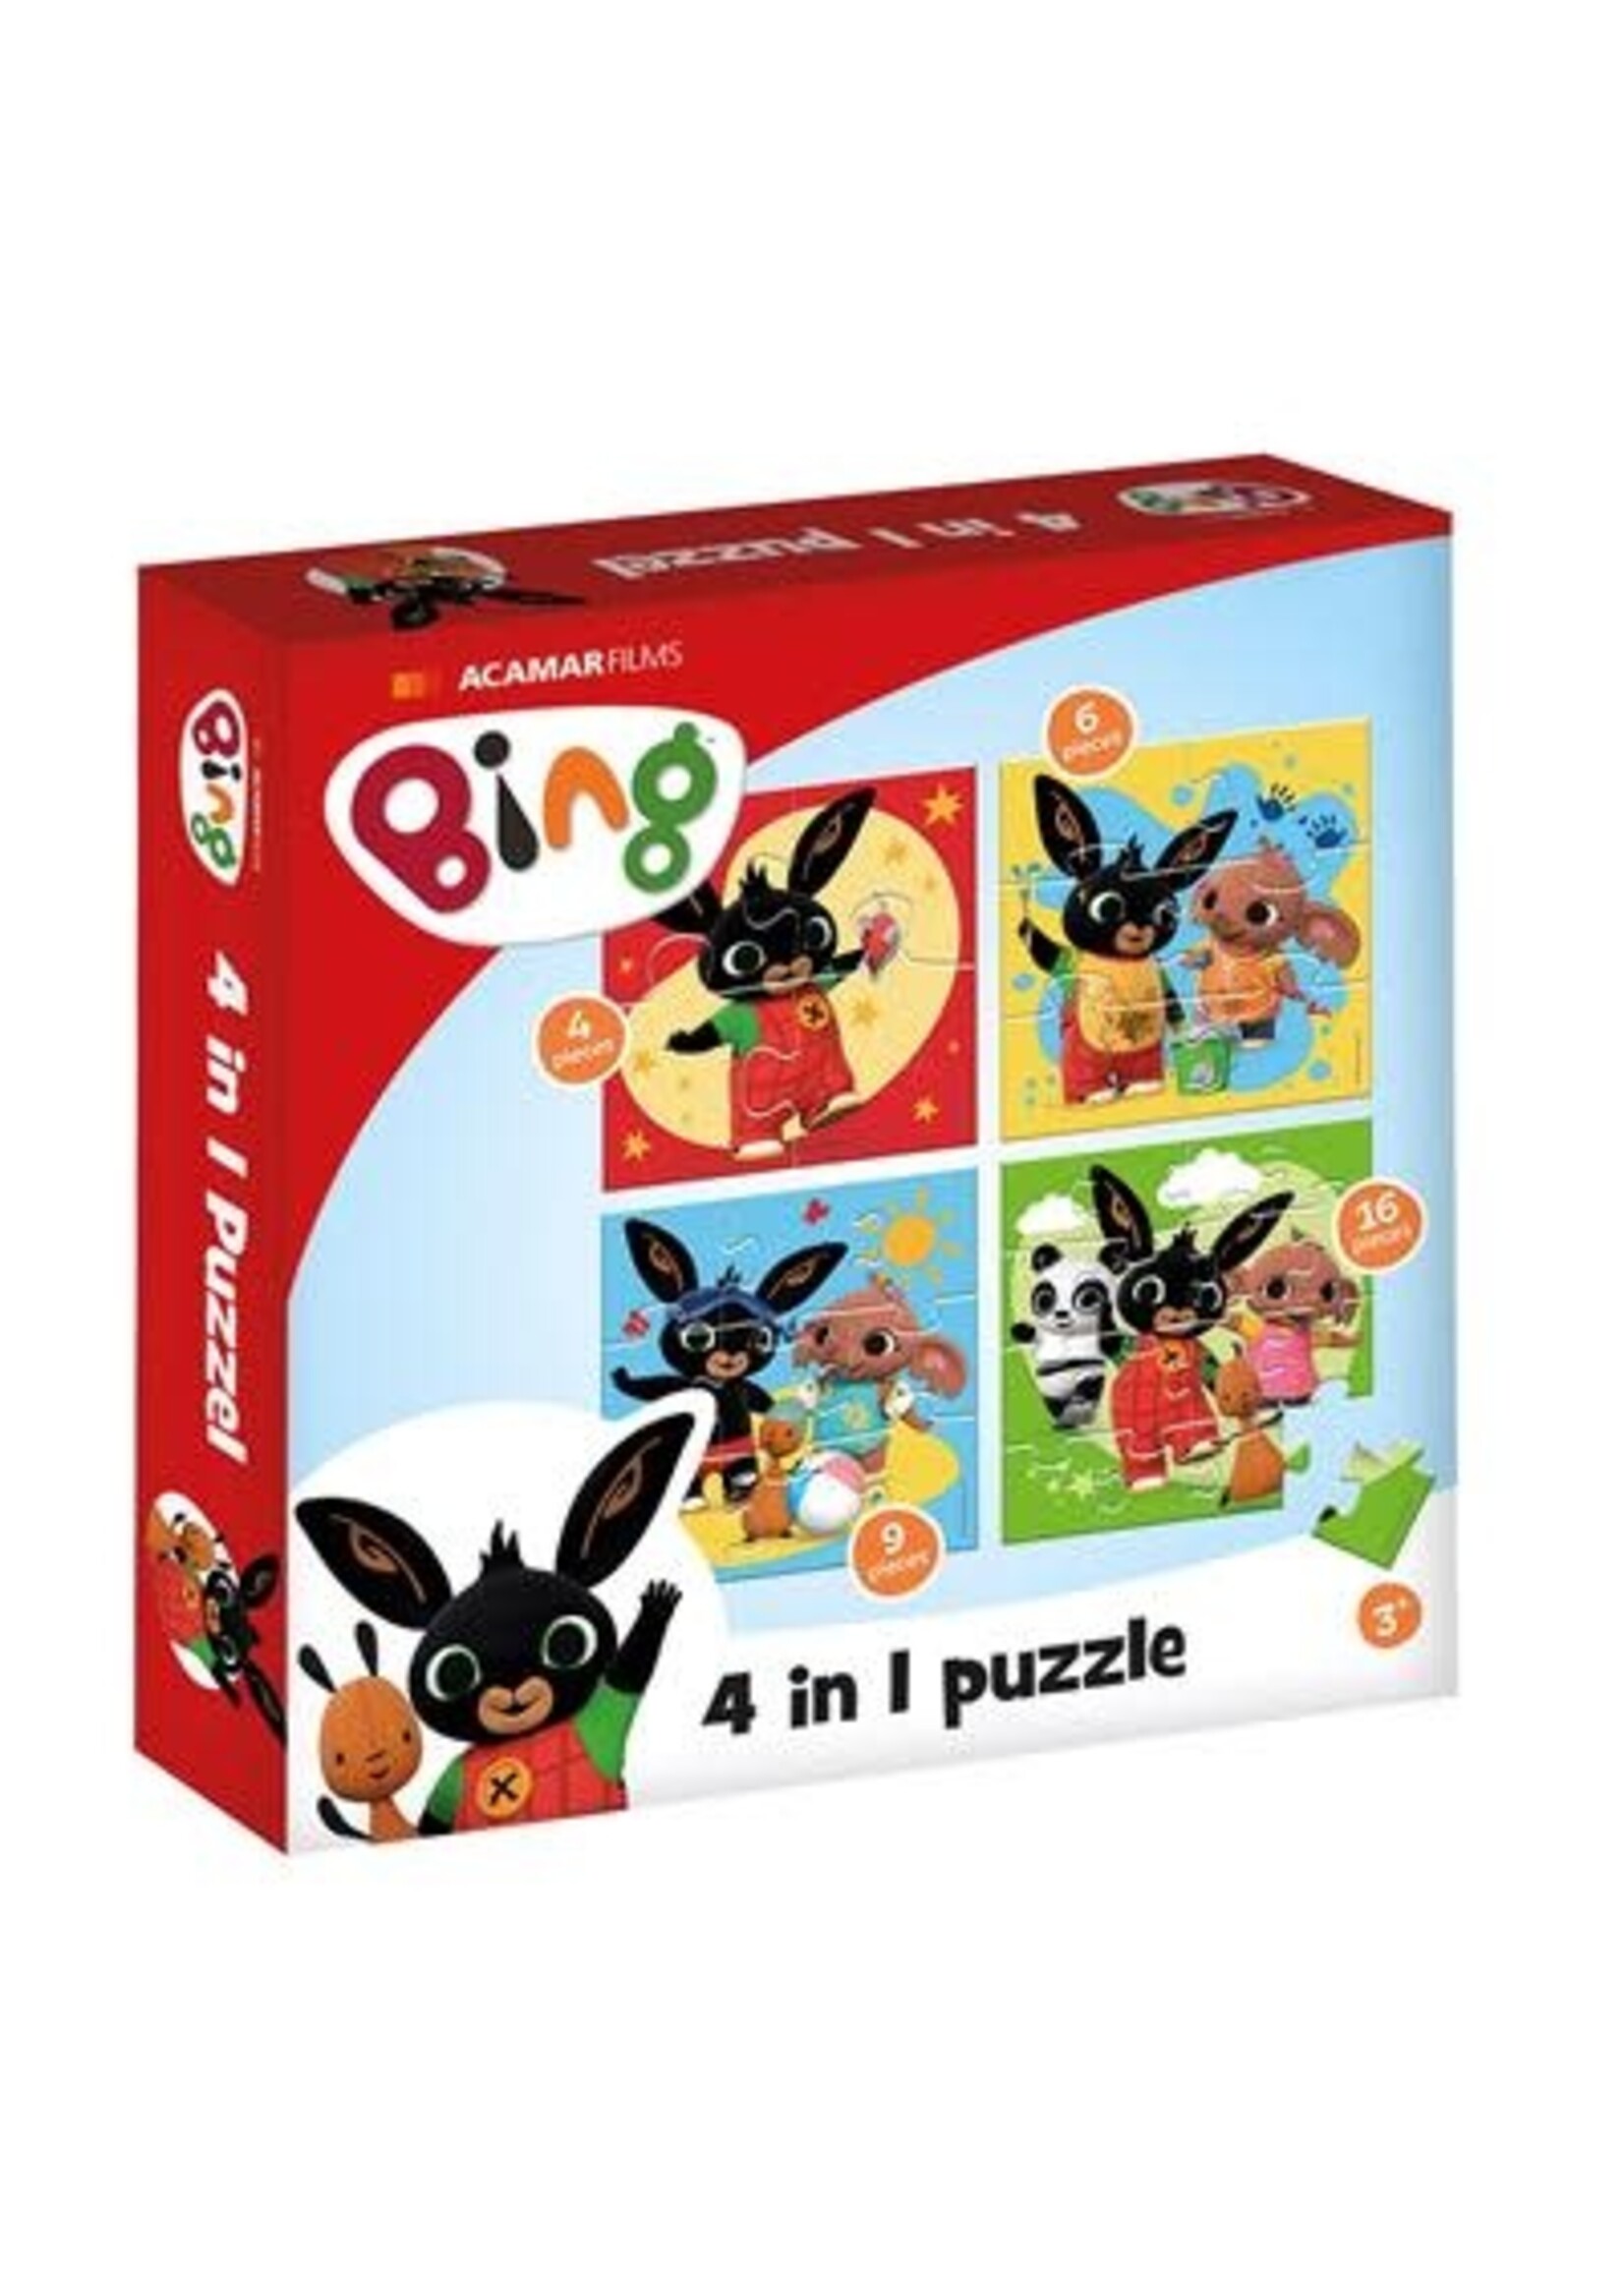 Bing BING 4 IN 1 PUZZLE